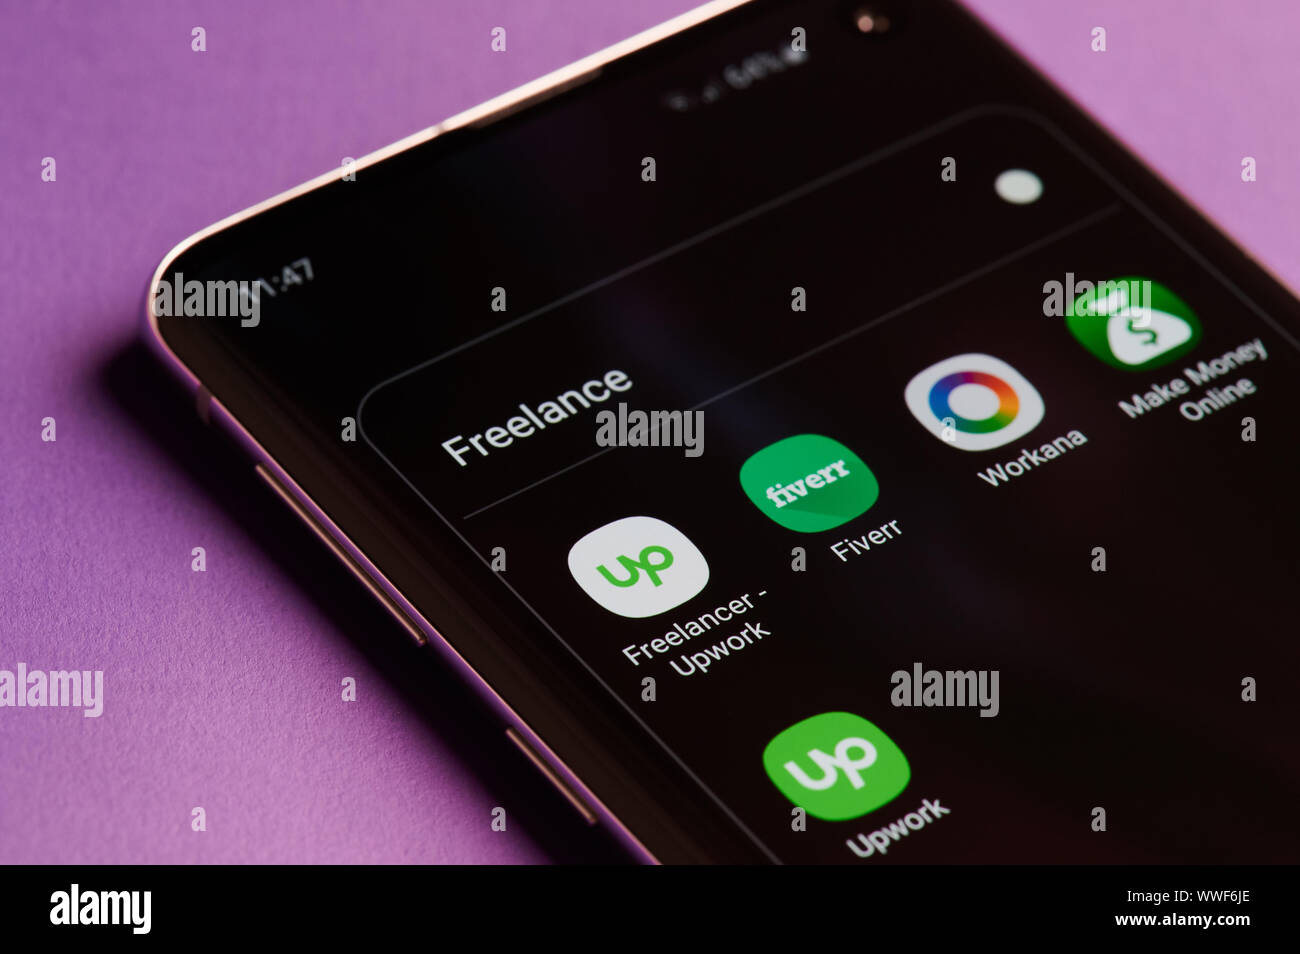 New york, USA - september 14, 2019:Apps for freelance work in smartphone screen close up view Stock Photo